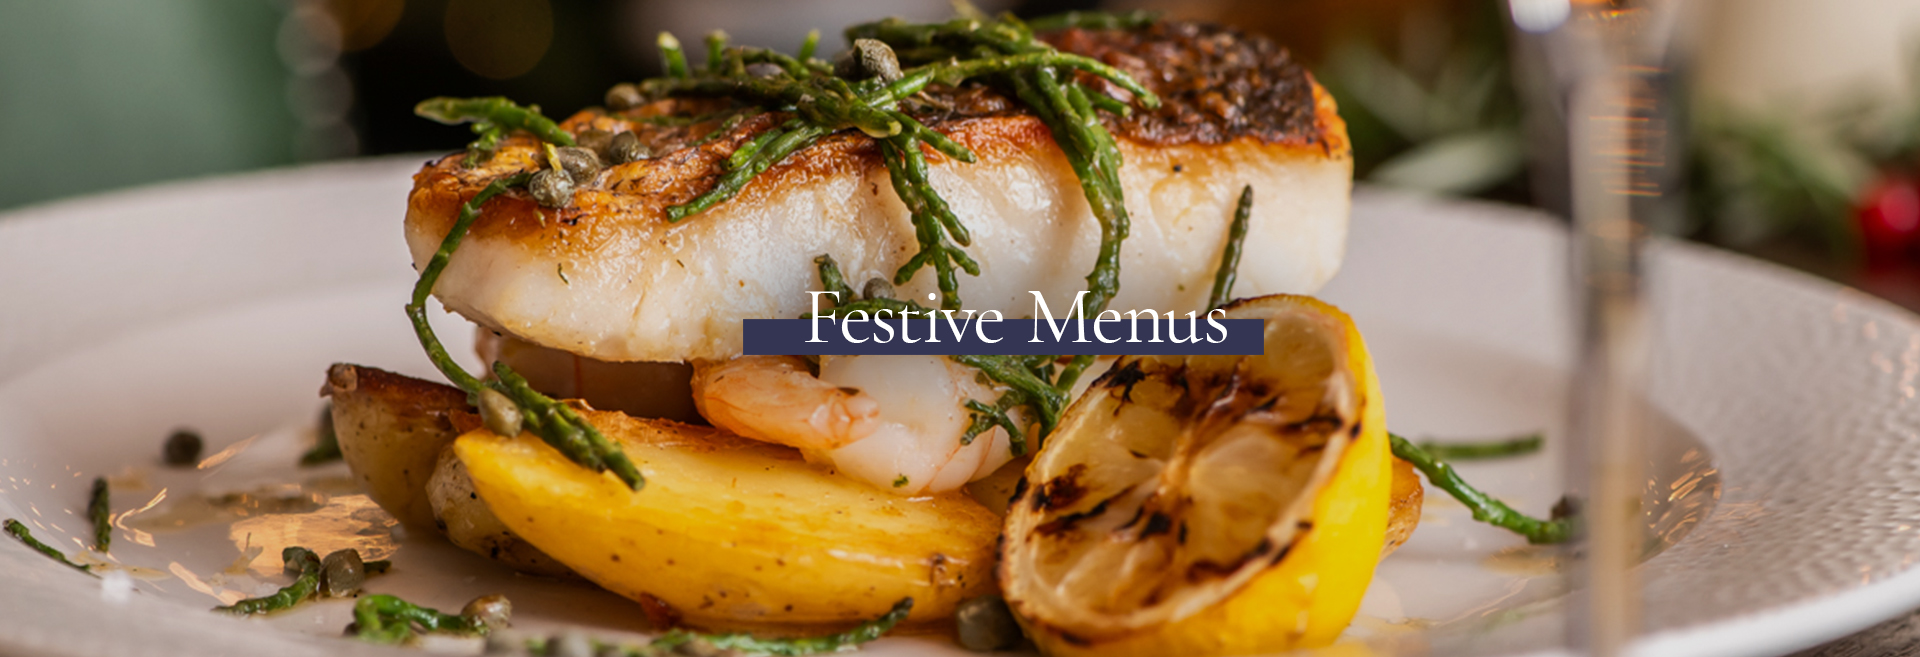 Festive Christmas Menu at The Builder's Arms 